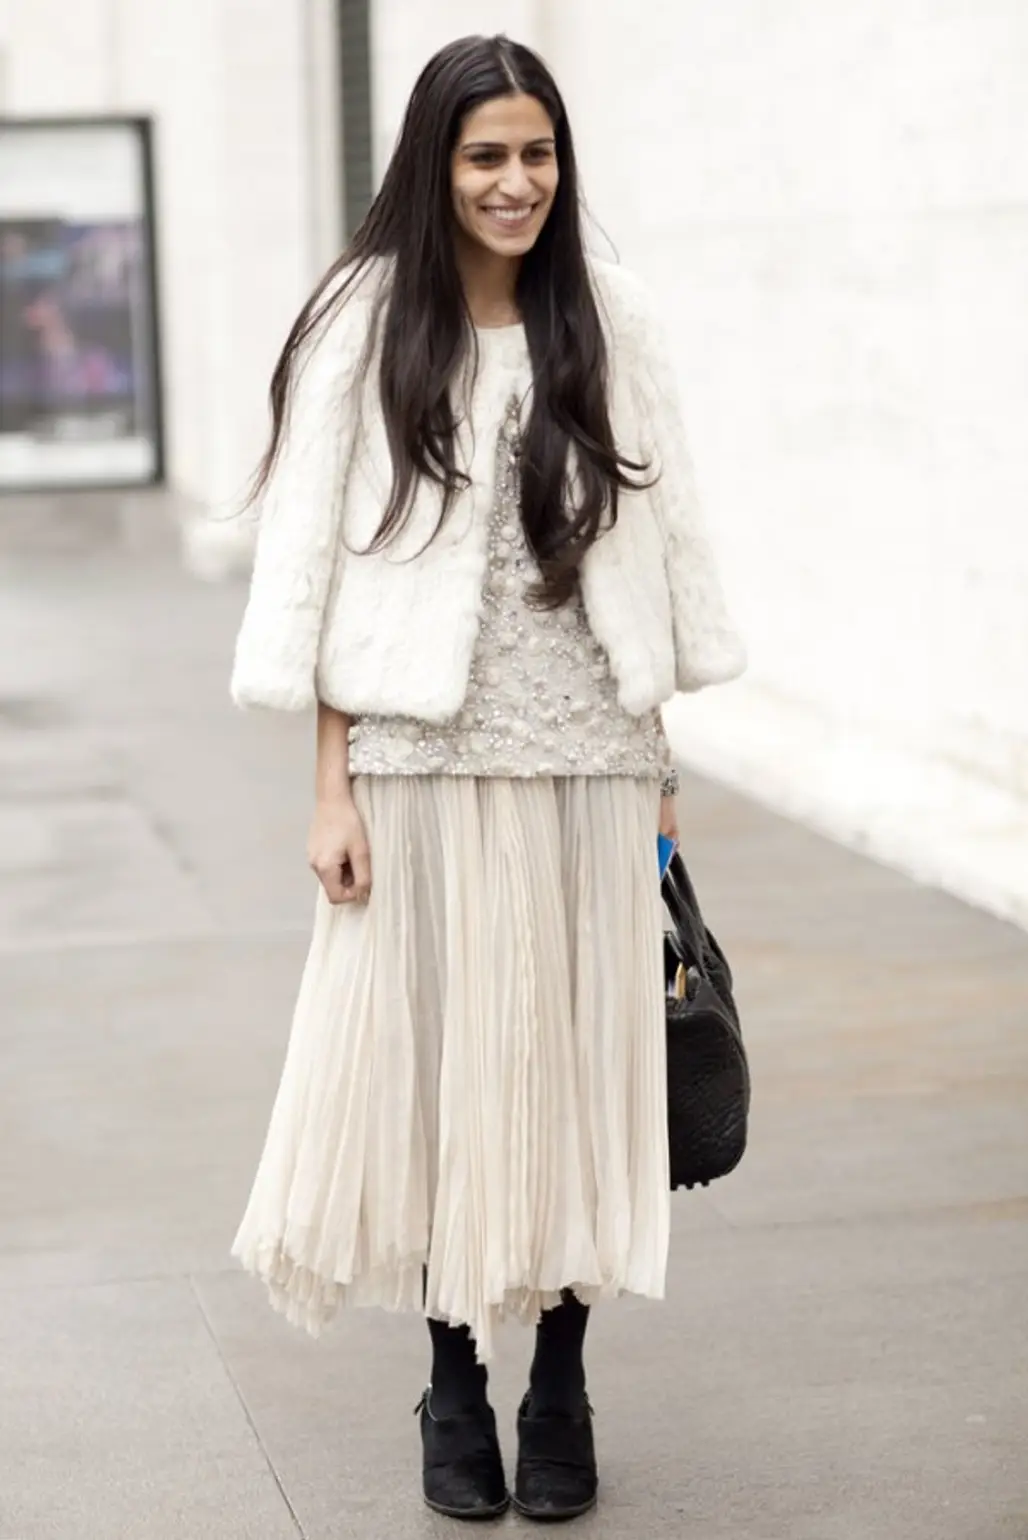 Who Says You Can't Wear Skirts in Winter?